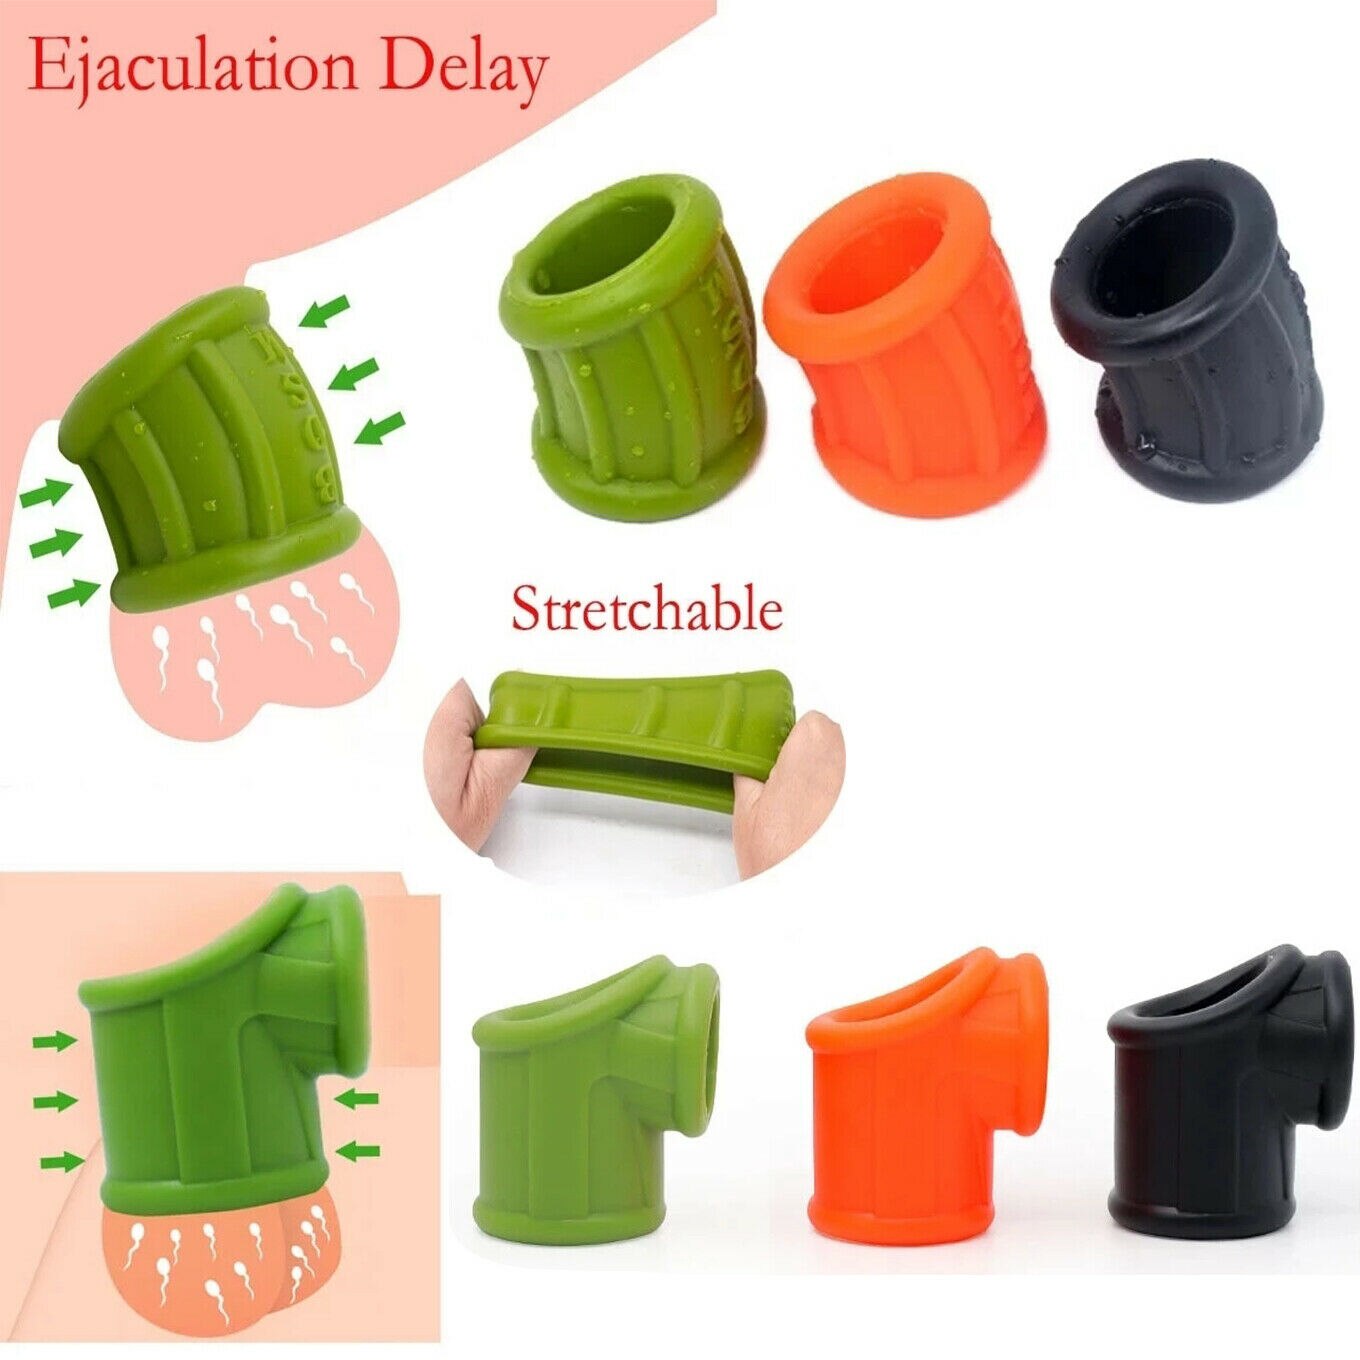 Soft Silicone Ball Stretcher To Help Delay Premature Ejaculation